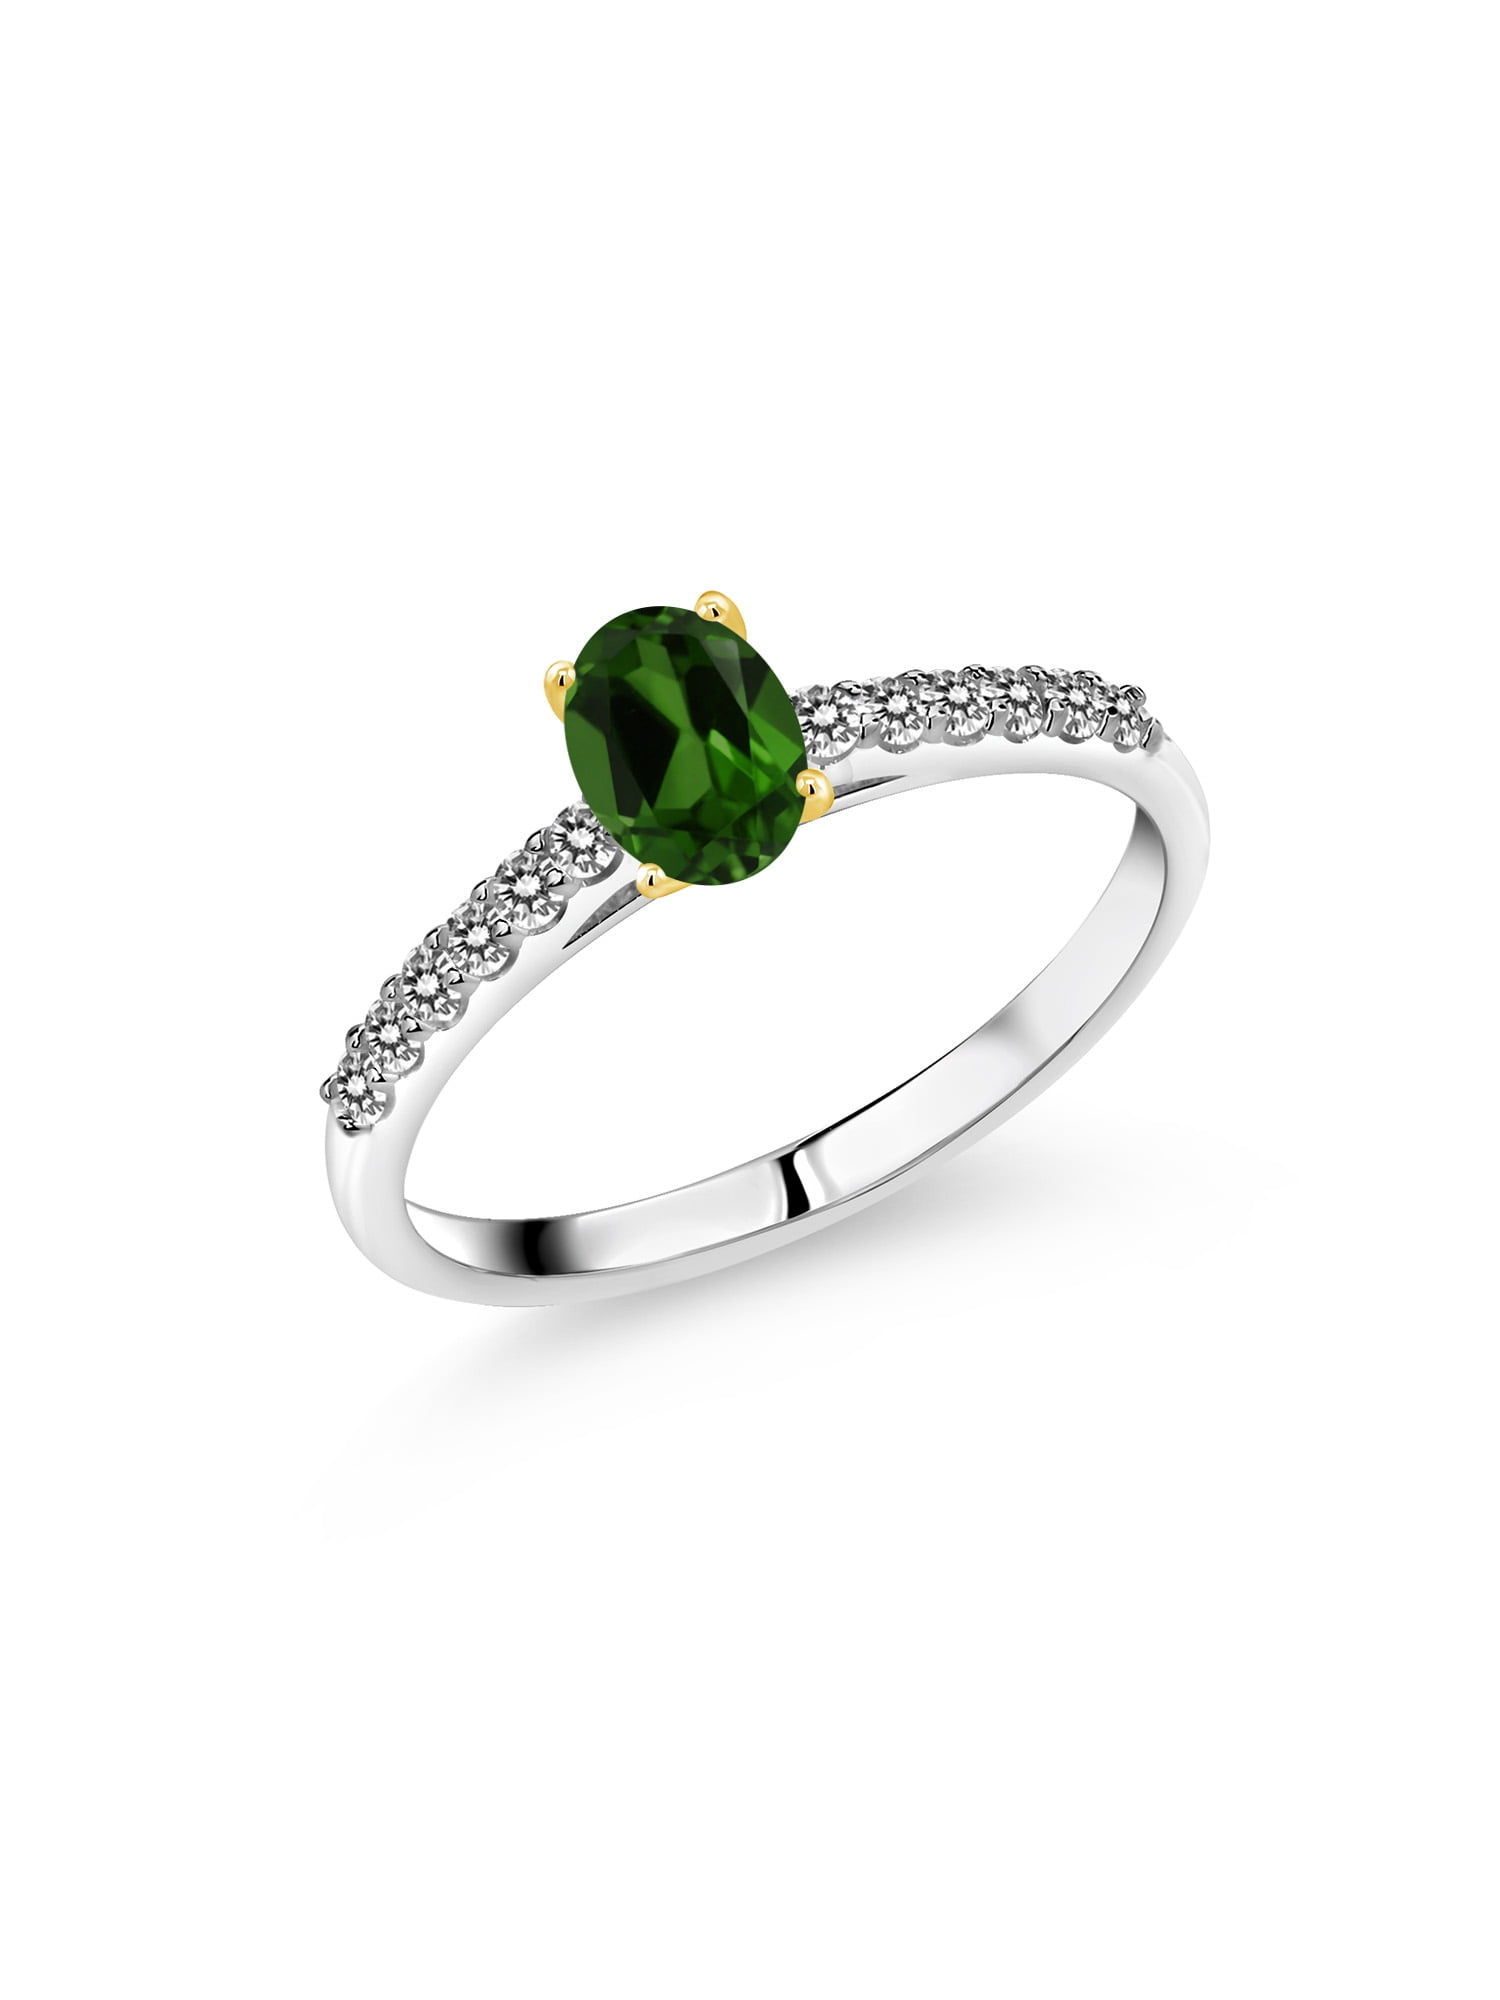 Gem Stone King 0.75 Ct Green Chrome Diopside White Diamond 925 Silver Ring  with 10K Yellow Gold Prongs